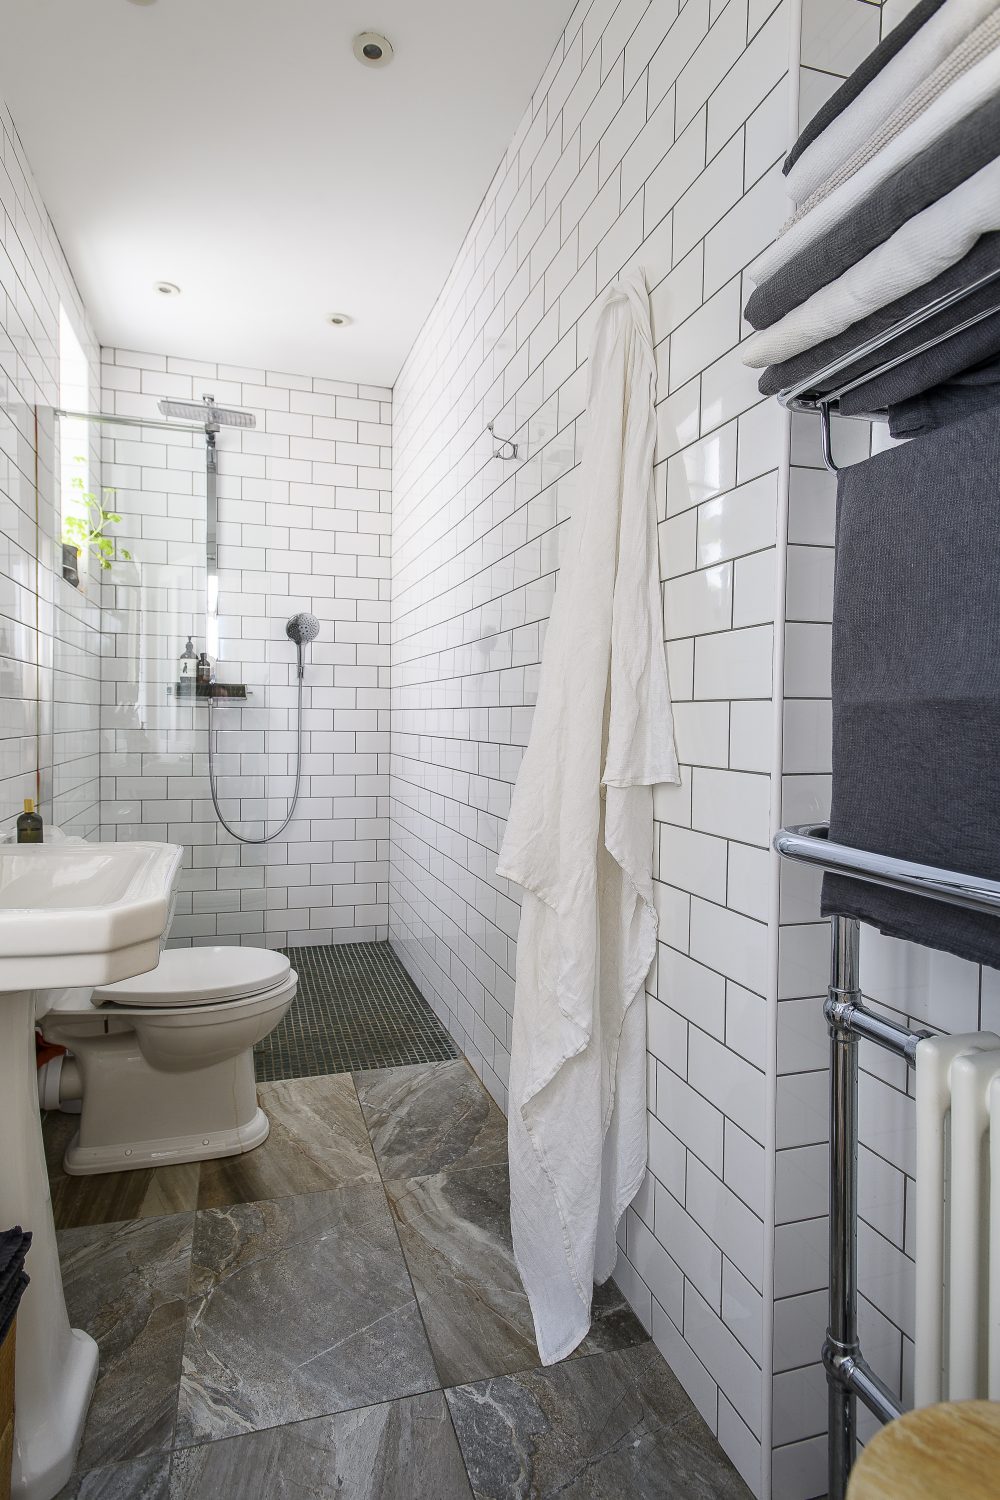 Pristine tiles with black grout stretch floor-to-ceiling in the bathroom;